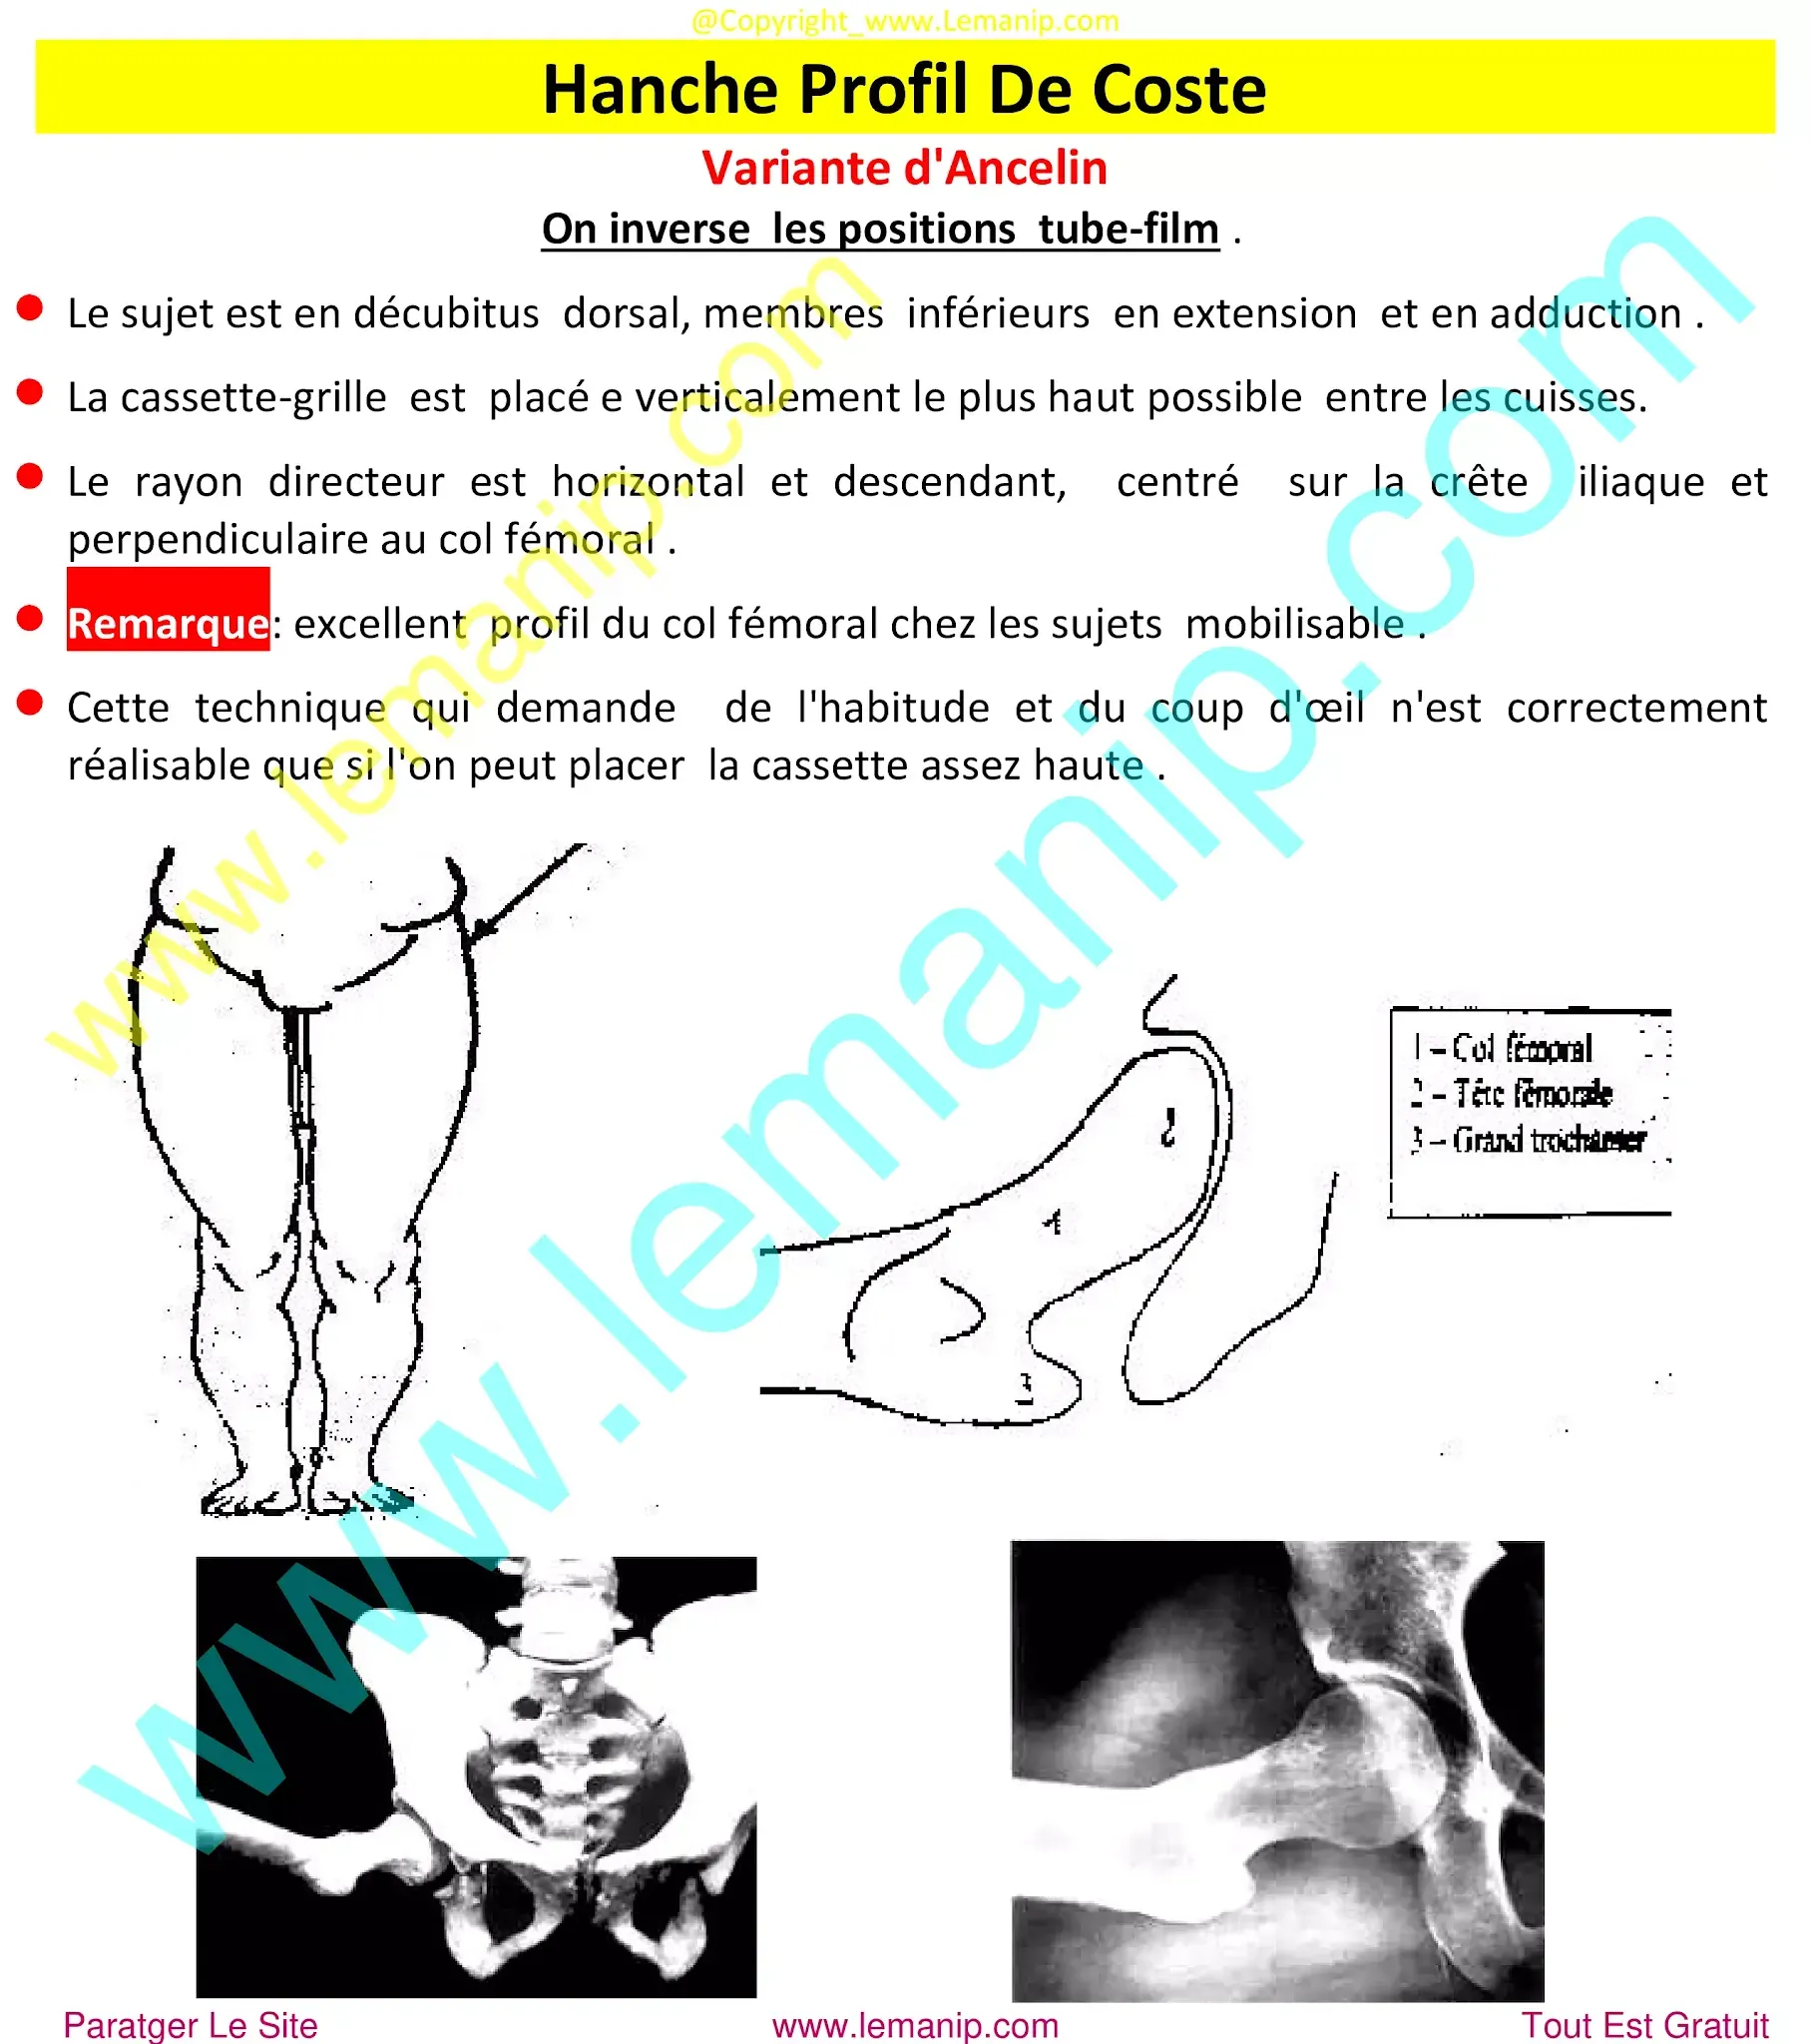 sacrococcygeal joint,pvns,pelvic floor mri,popping hip joint,posterior hip replacement,hip ligaments,rheumatoid,chirurgie hanche clinique privée,douleur hanche et cuisse,chirurgie hanche